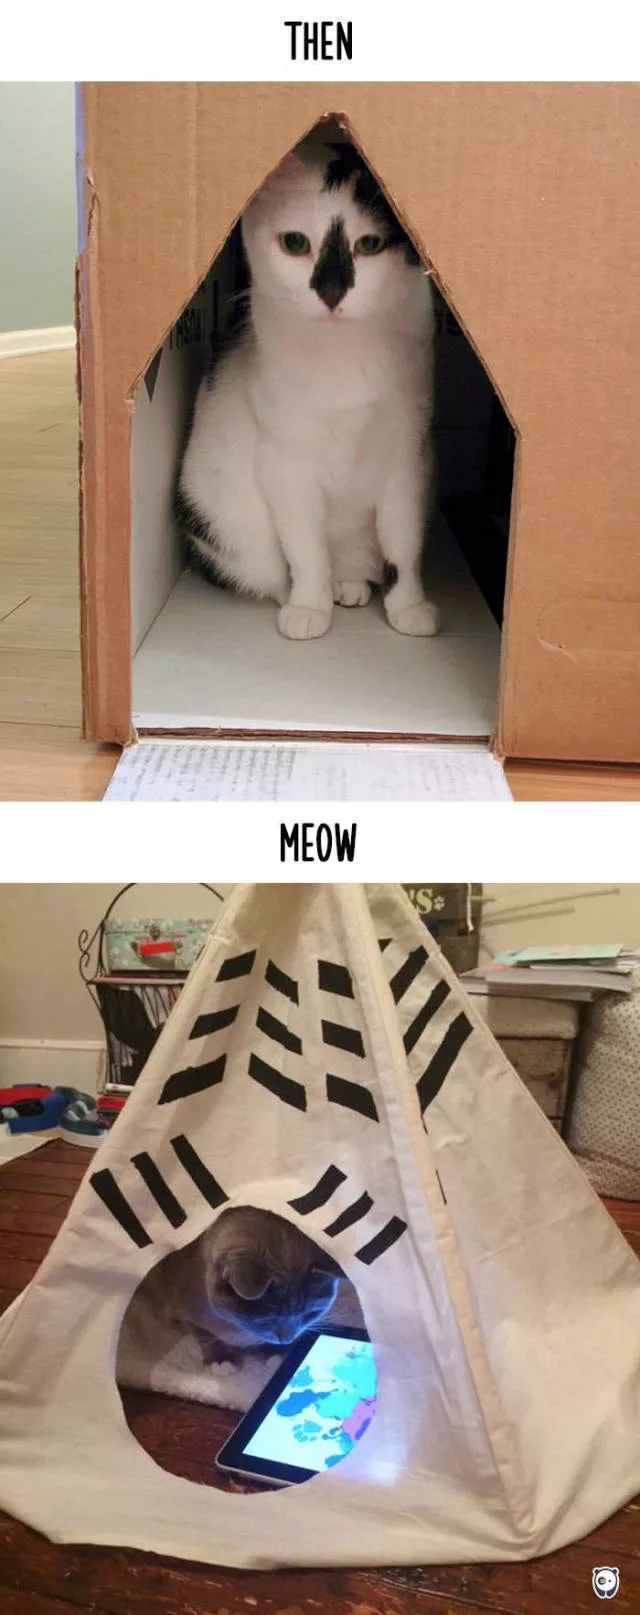 Technology has changed the habits of cats - #13 